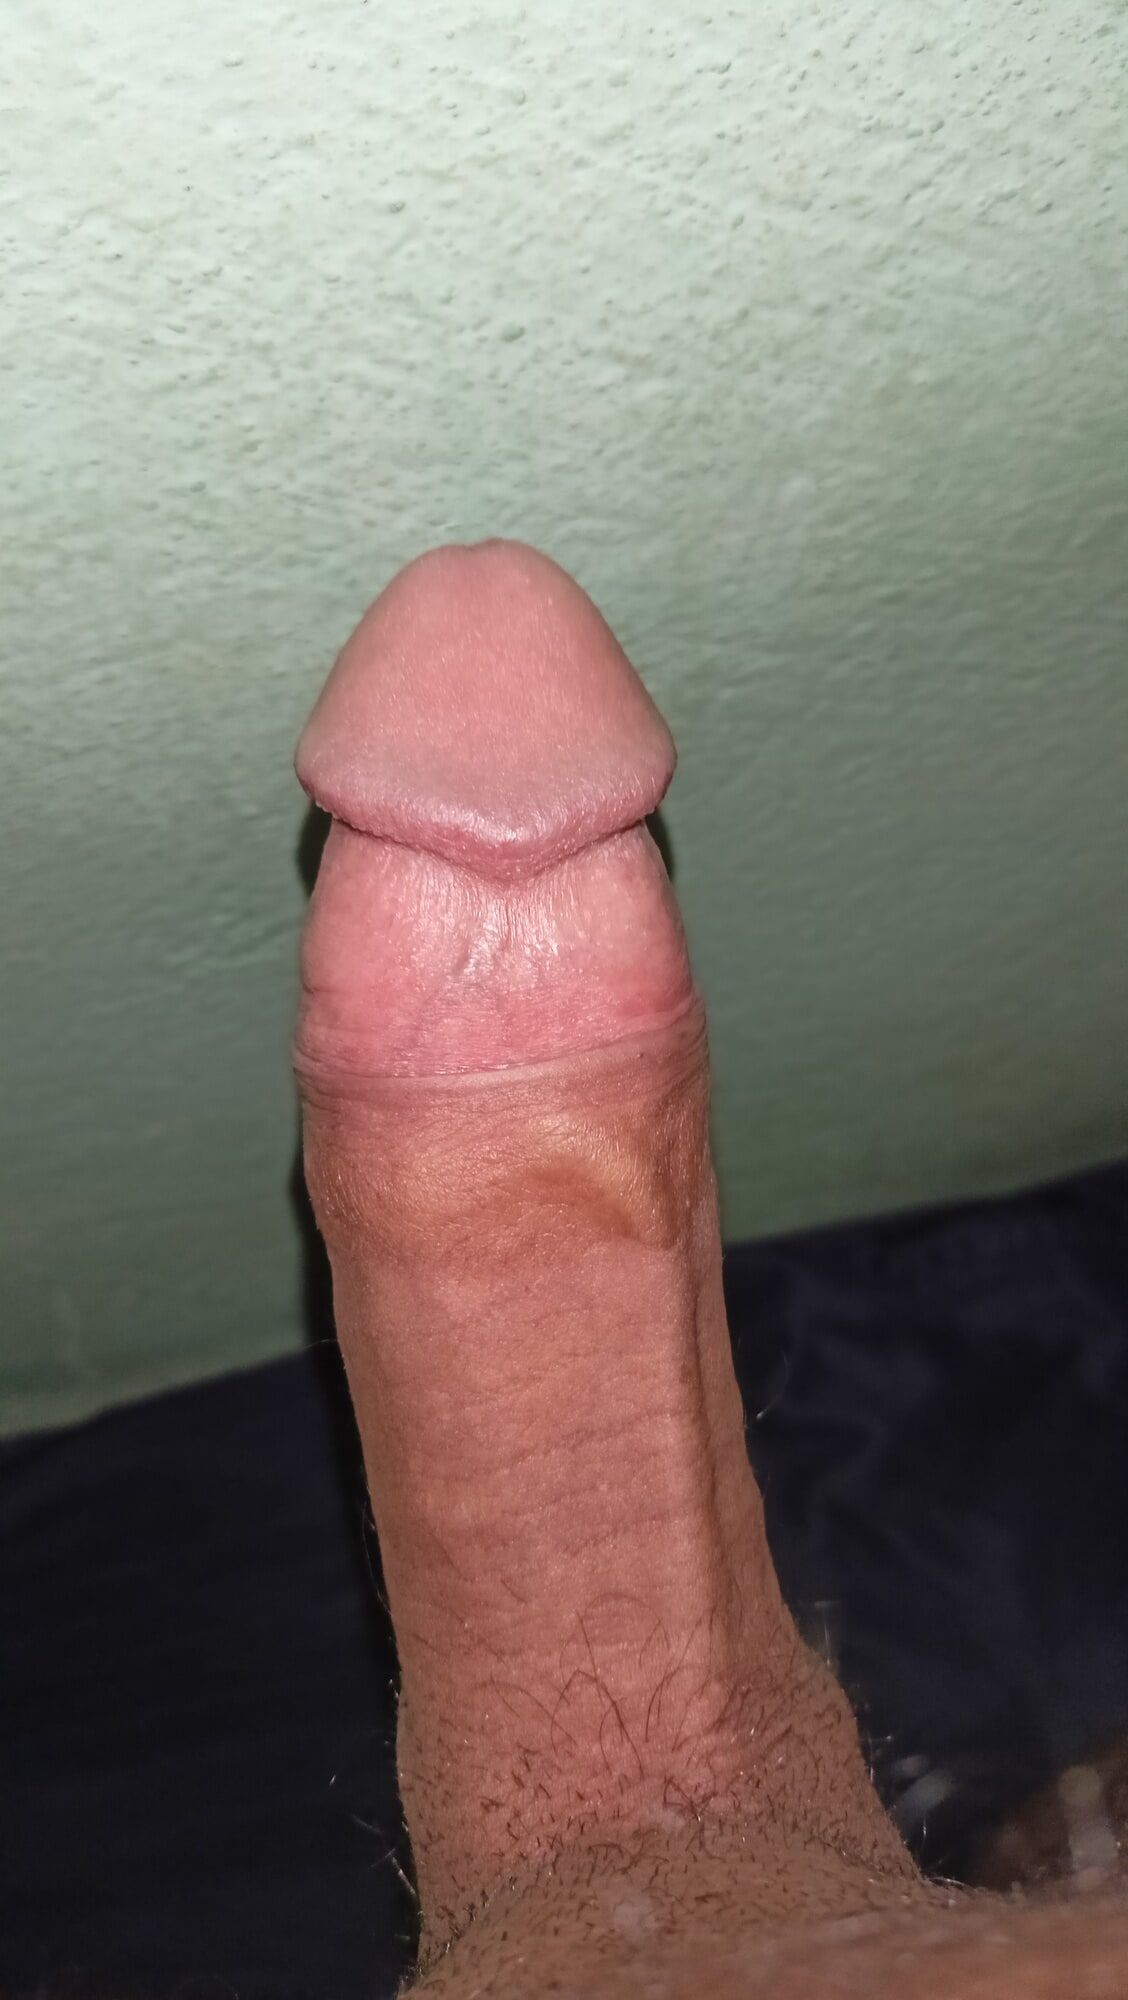 Opinions on my 5.7 inch cock!?